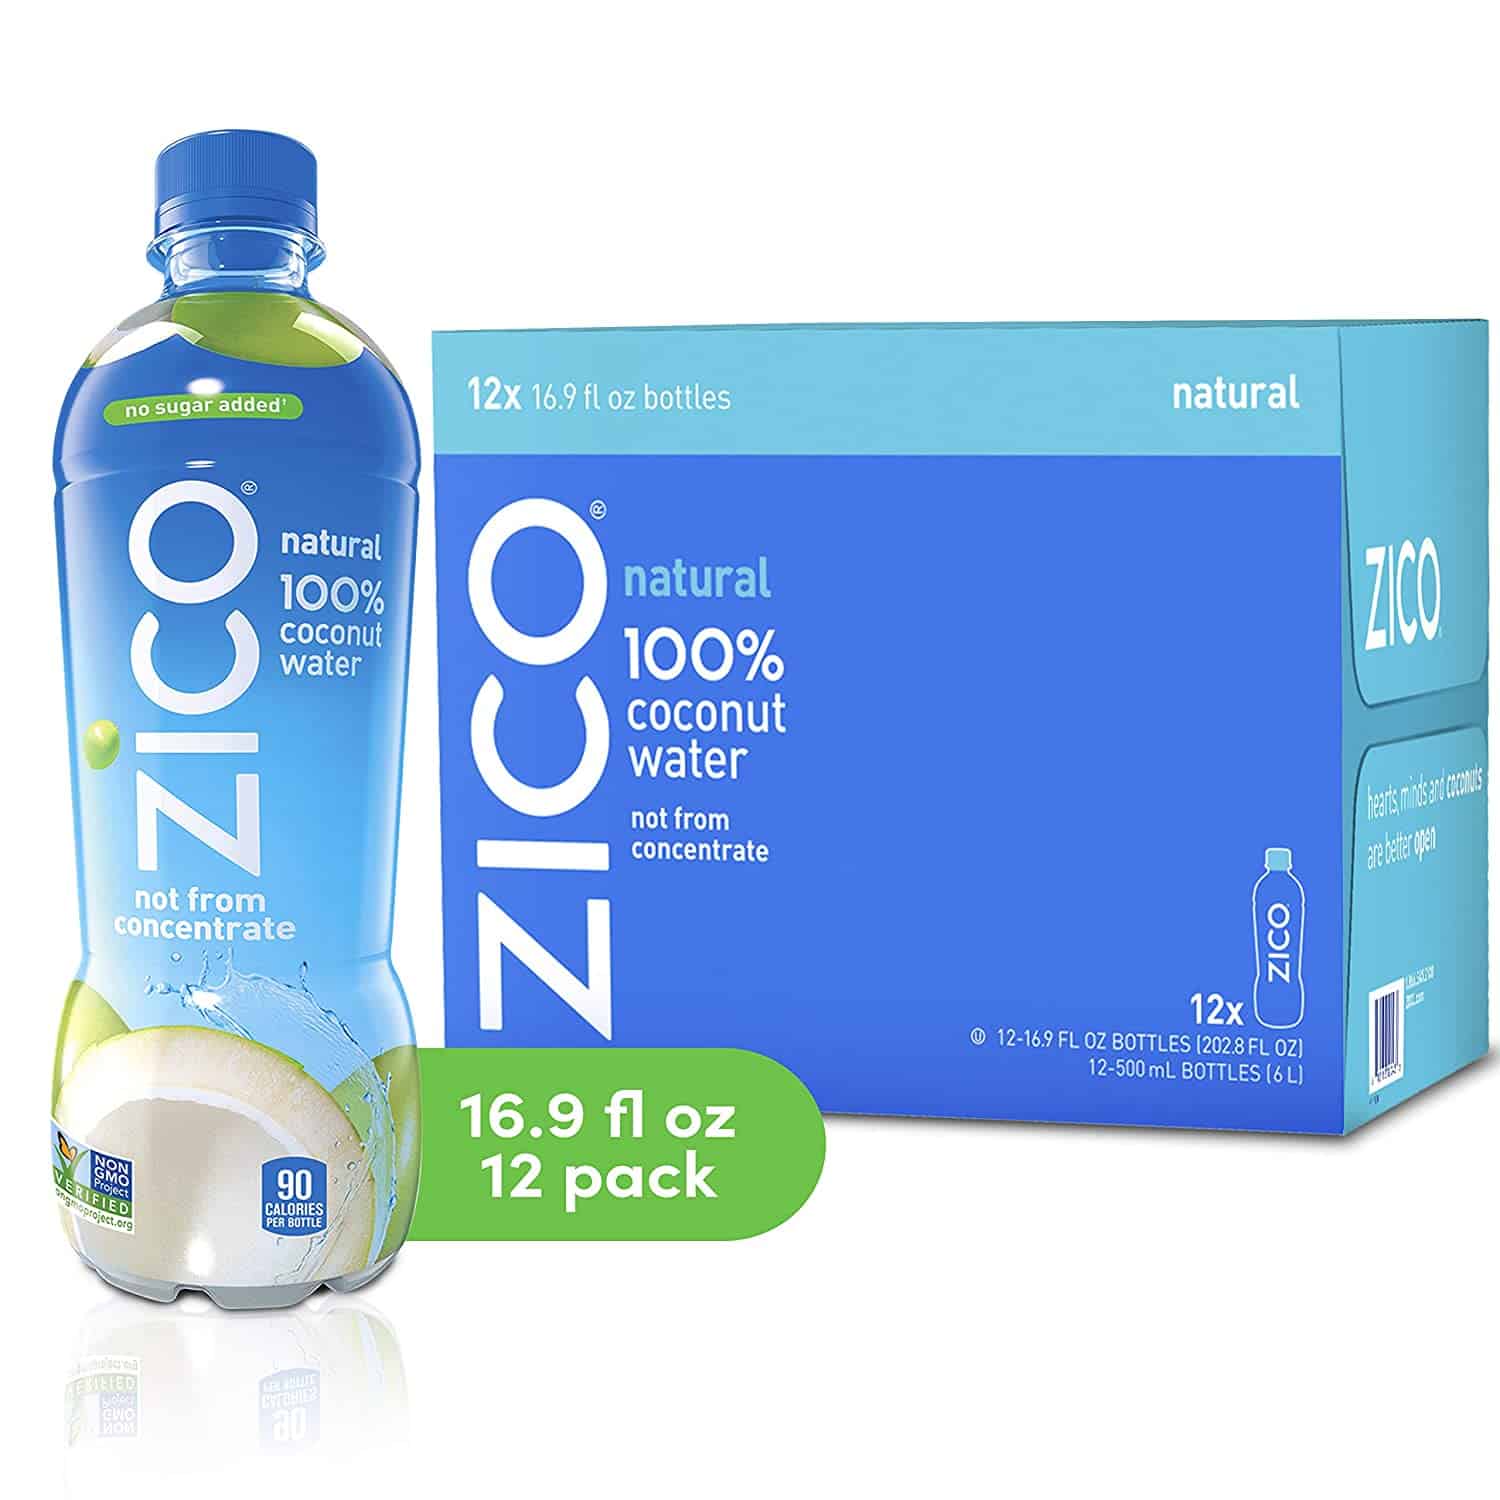 ZICO Natural 100% Coconut Water Drink, 16.9 fl oz, 12 Pack